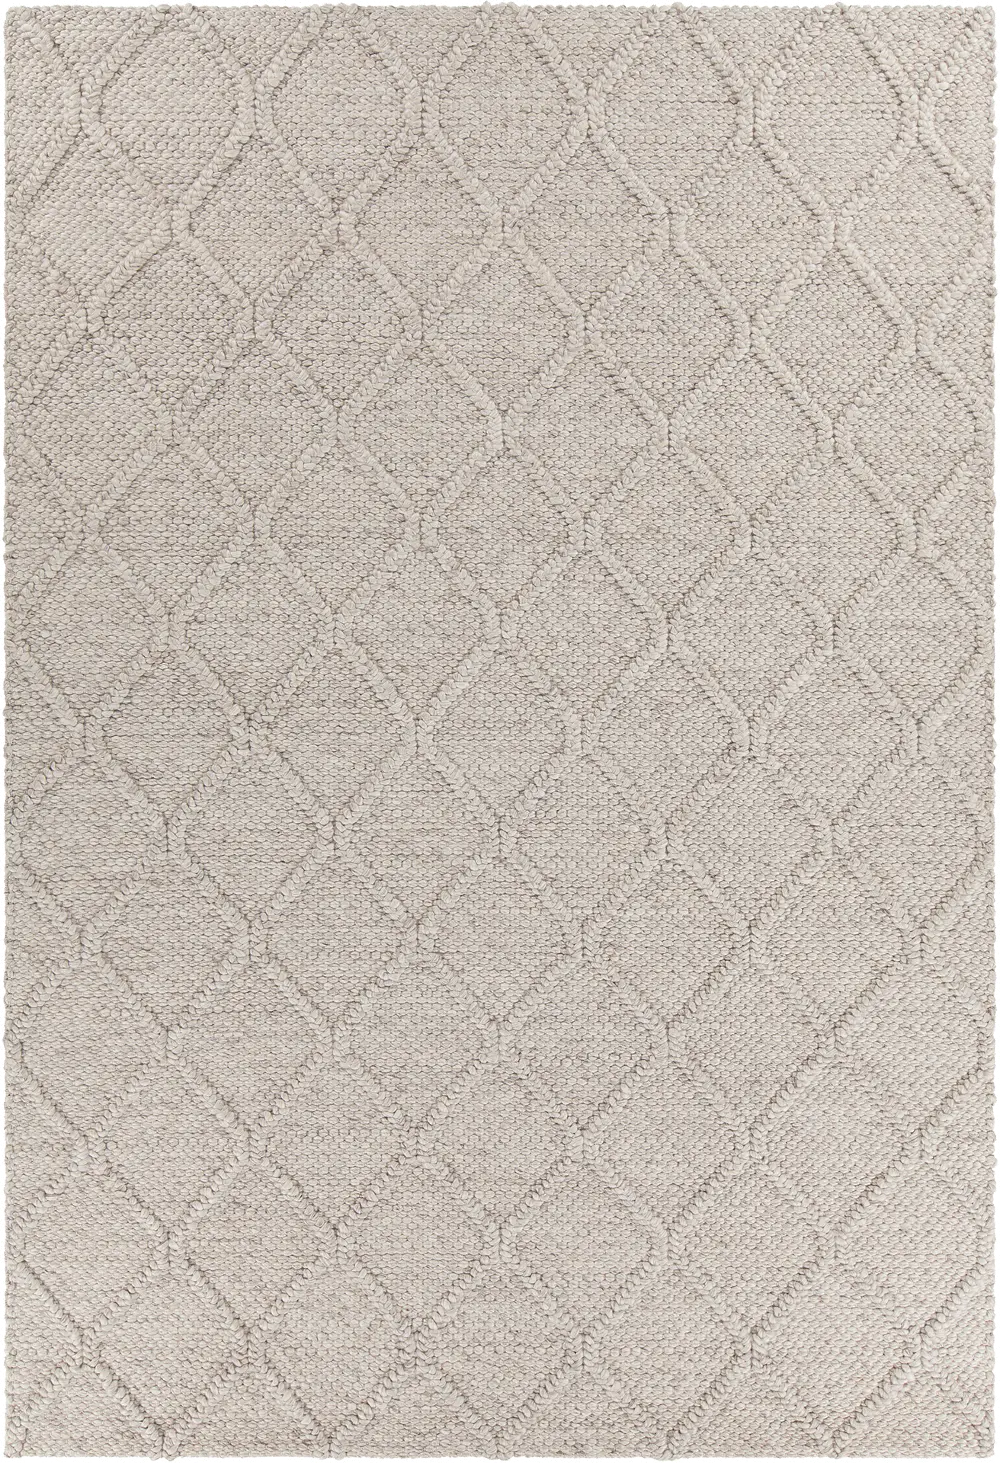 8 x 11 Large Contemporary Gray Area Rug - Sujan-1